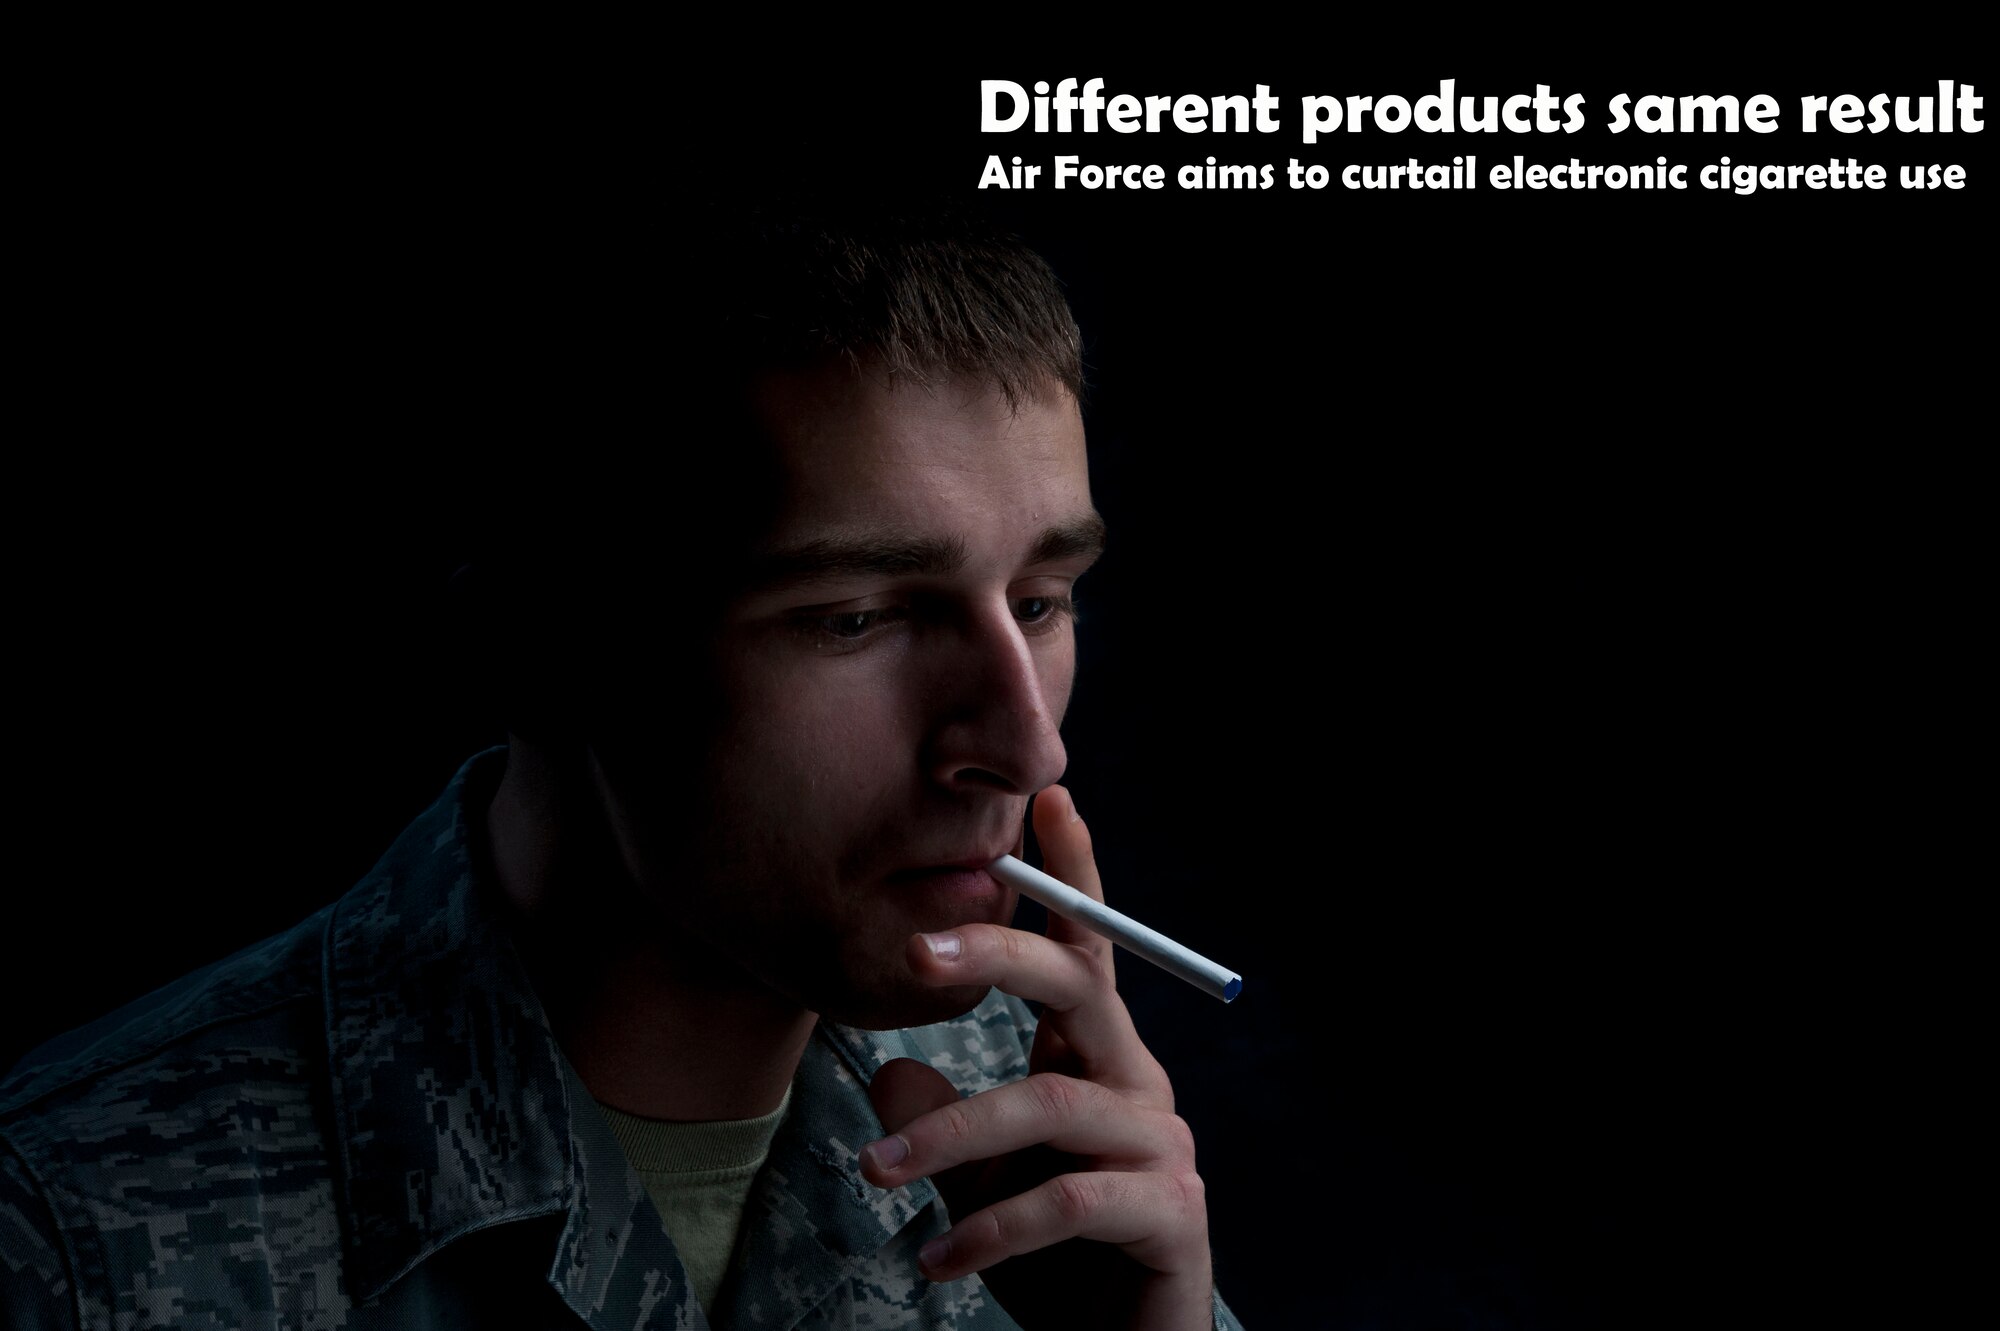 Electronic cigarettes and all other tobacco products, to include smokeless tobacco, are prohibited from use on all military installations unless in a pre-determined smoking area. Regulations for tobacco use by Air Force service members can be found in Air Force Instruction 40-102, Tobacco use in the military. (U.S. Air Force photo illustration by Senior Airman Daniel Hughes)